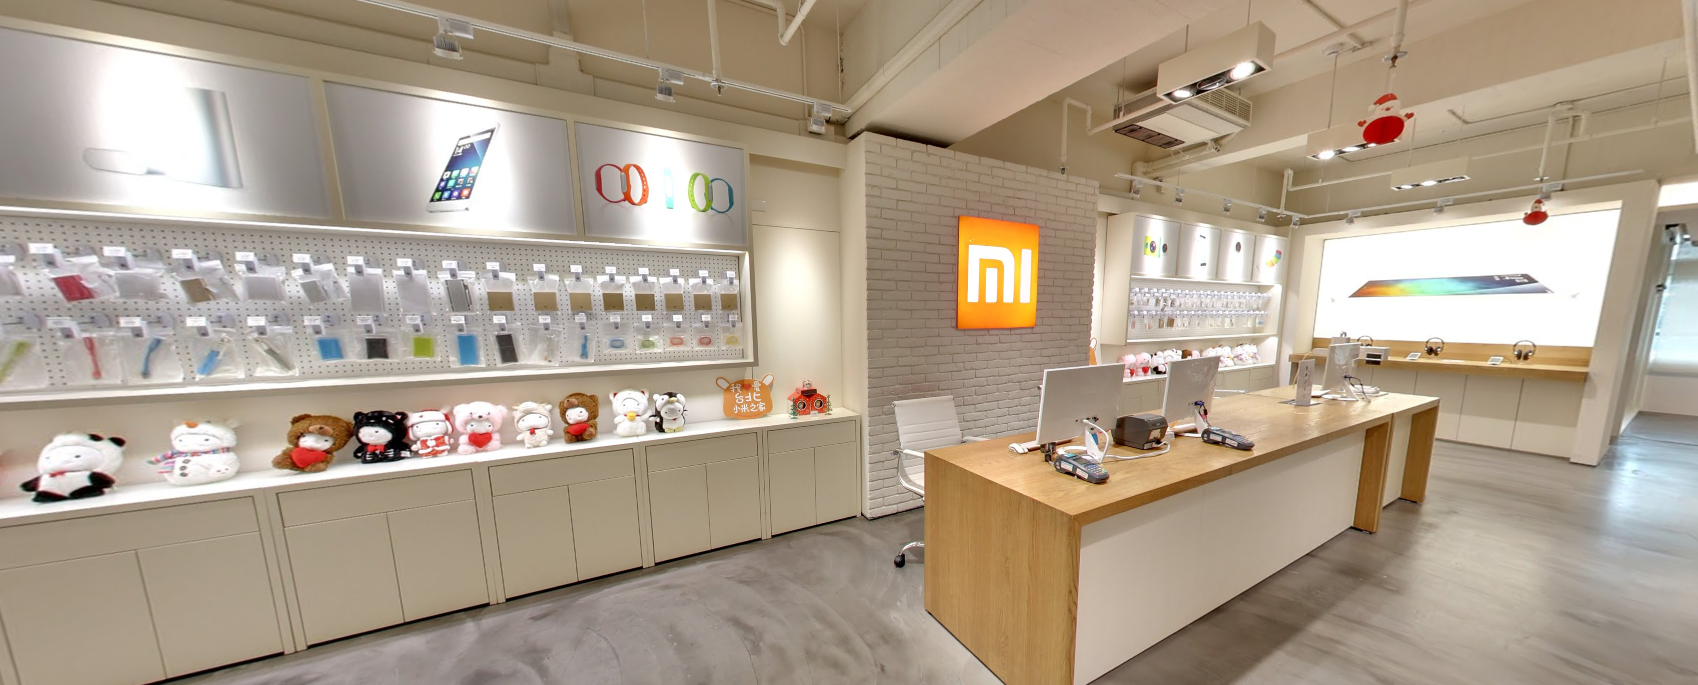 Teenagers robbed Xiaomi branded store in 30 seconds